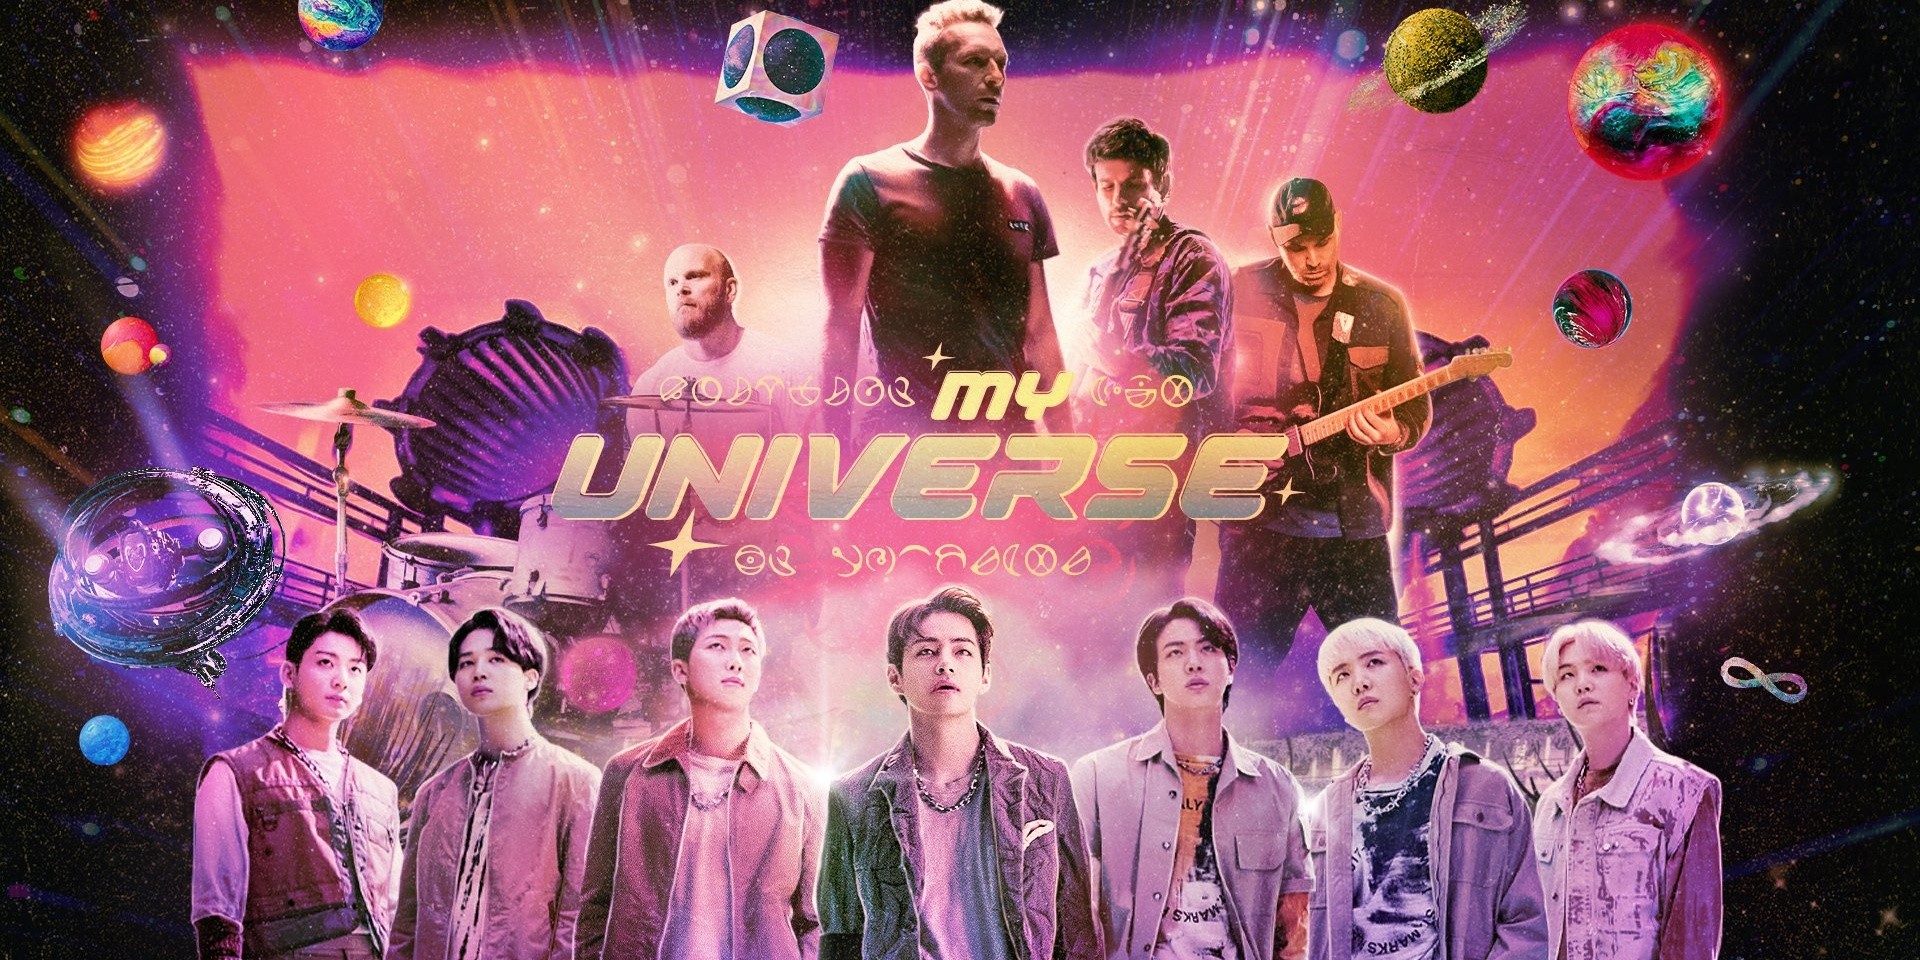 BTS and Coldplay go on an intergalactic adventure in official music video for 'My Universe' – watch